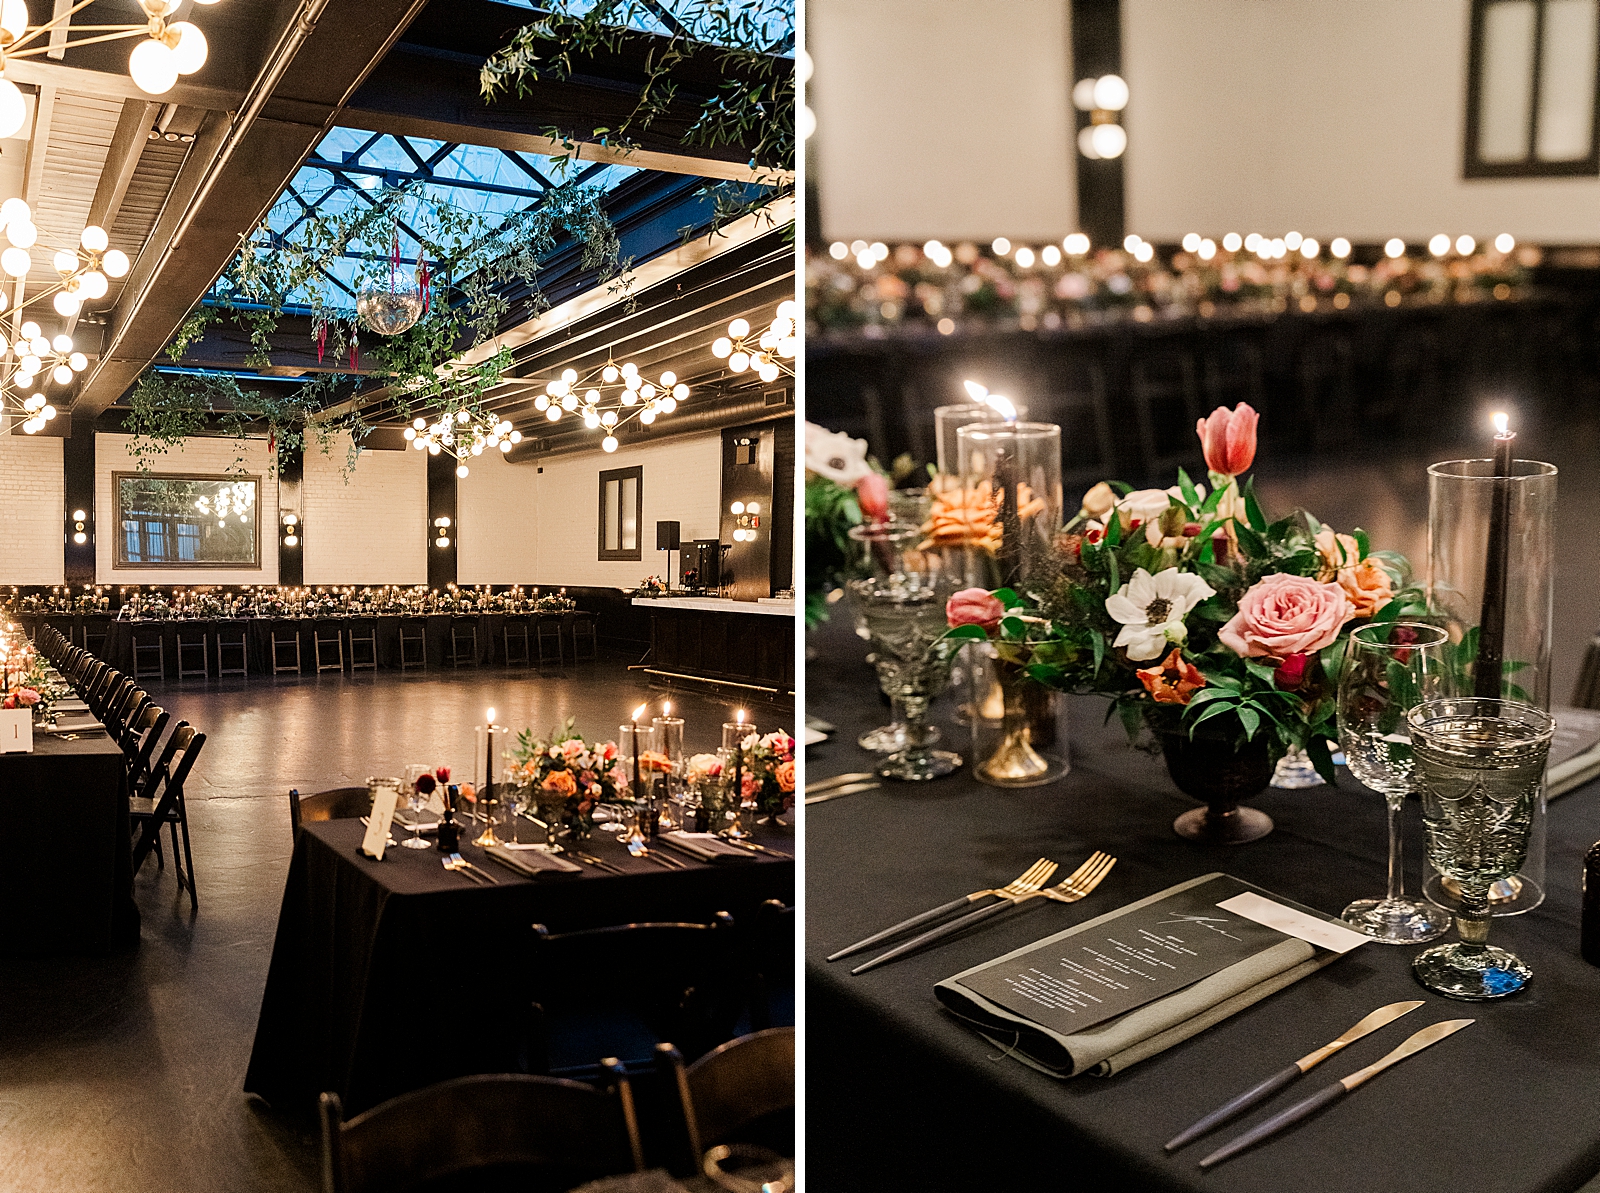 Left photo: Shot of the reception space.
Right photo: Close up shot of the place settings on the reception tables. 